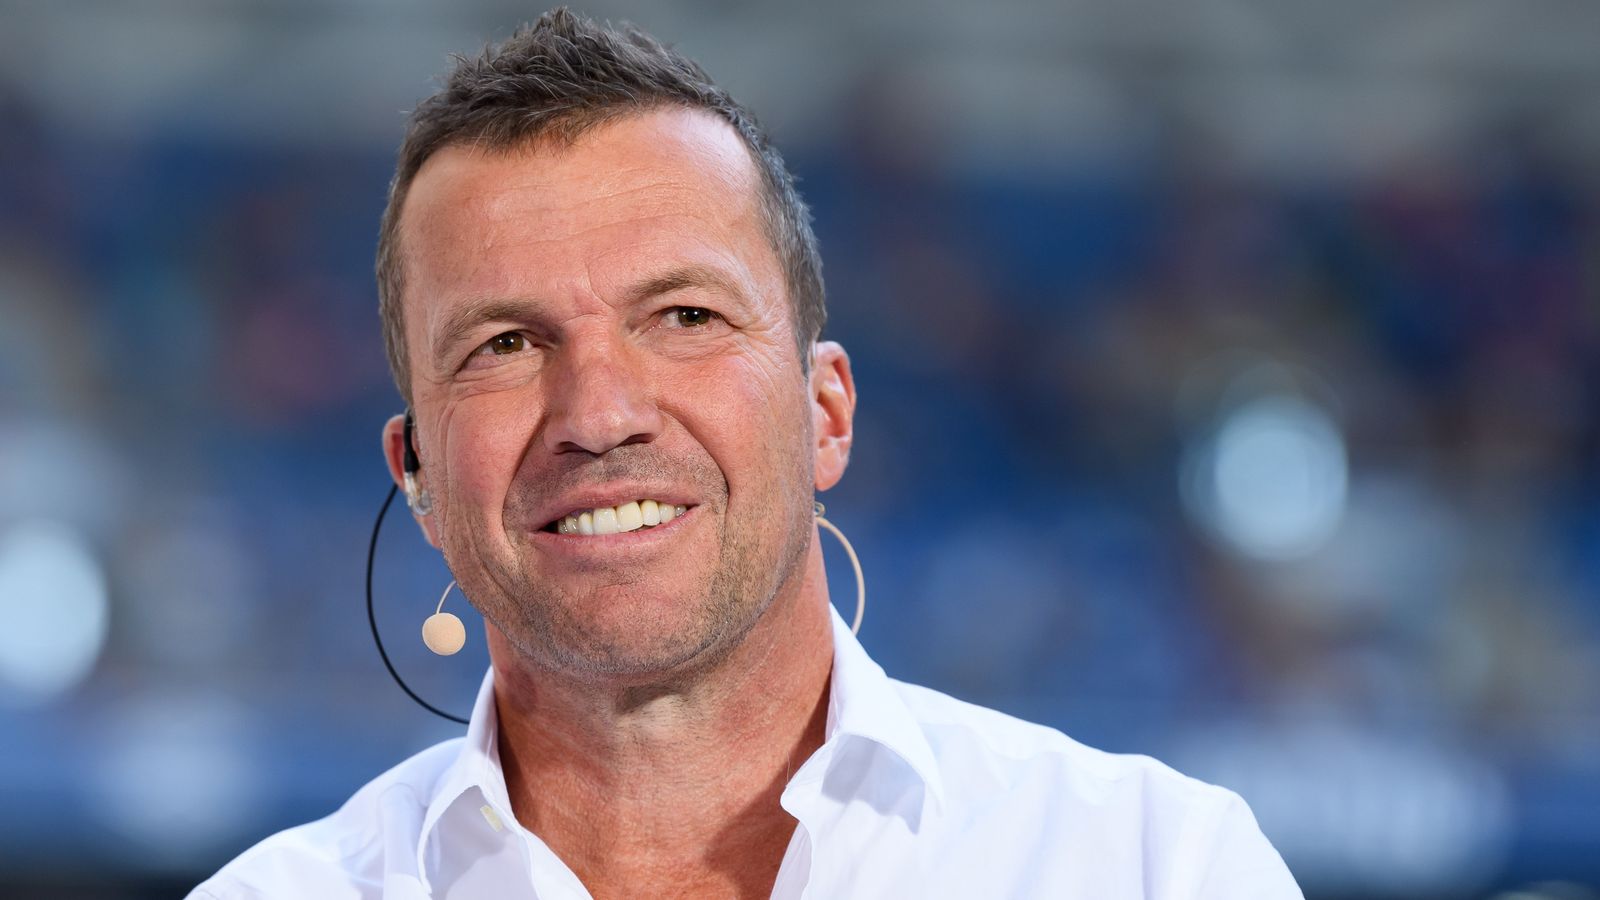 Germany legend Lothar Matthaus respects England but says players alone are not e..